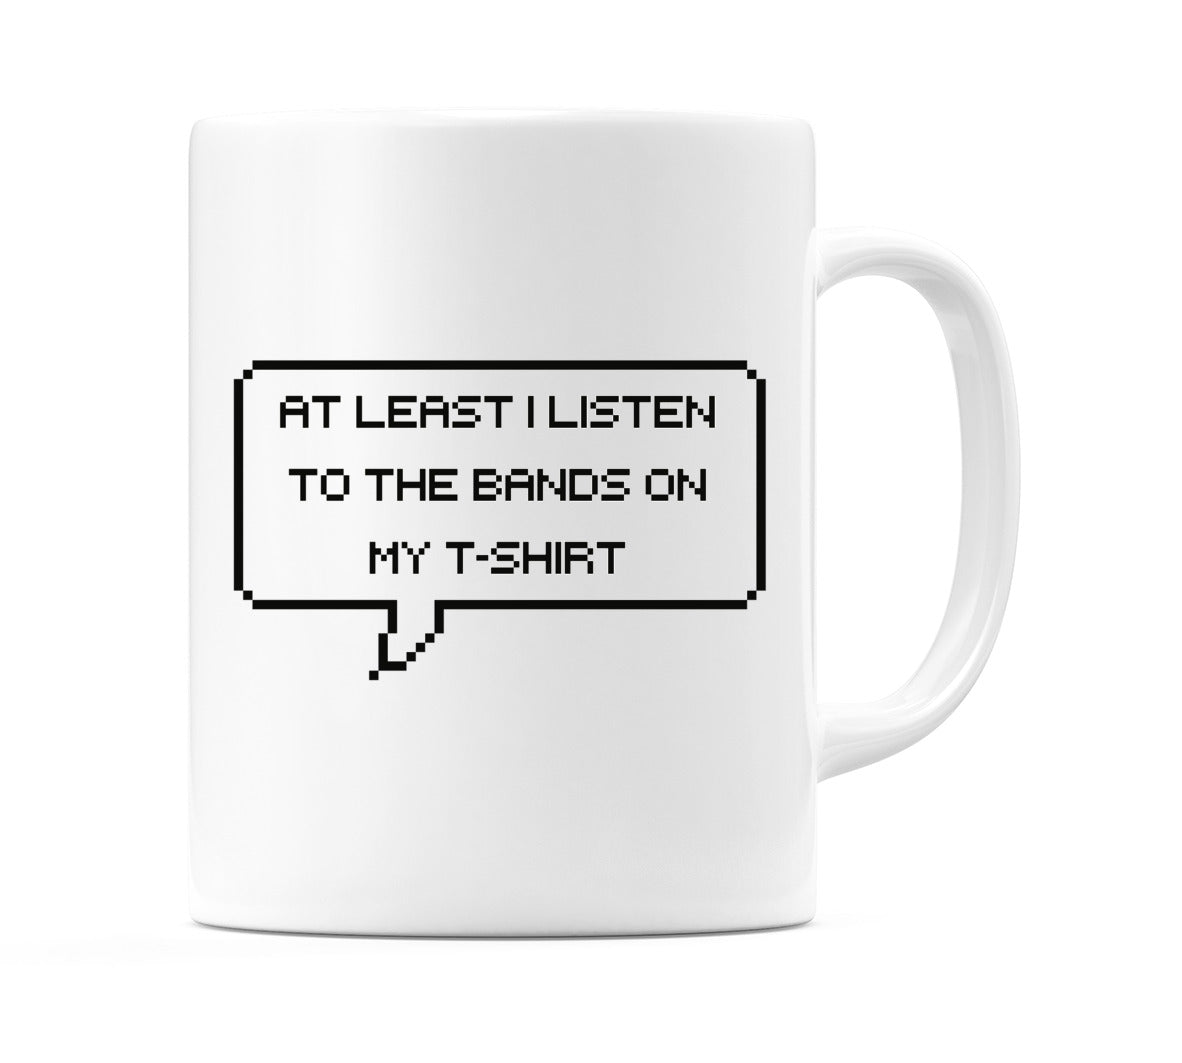 At least I Listen to the Bands on My T-Shirt Mug